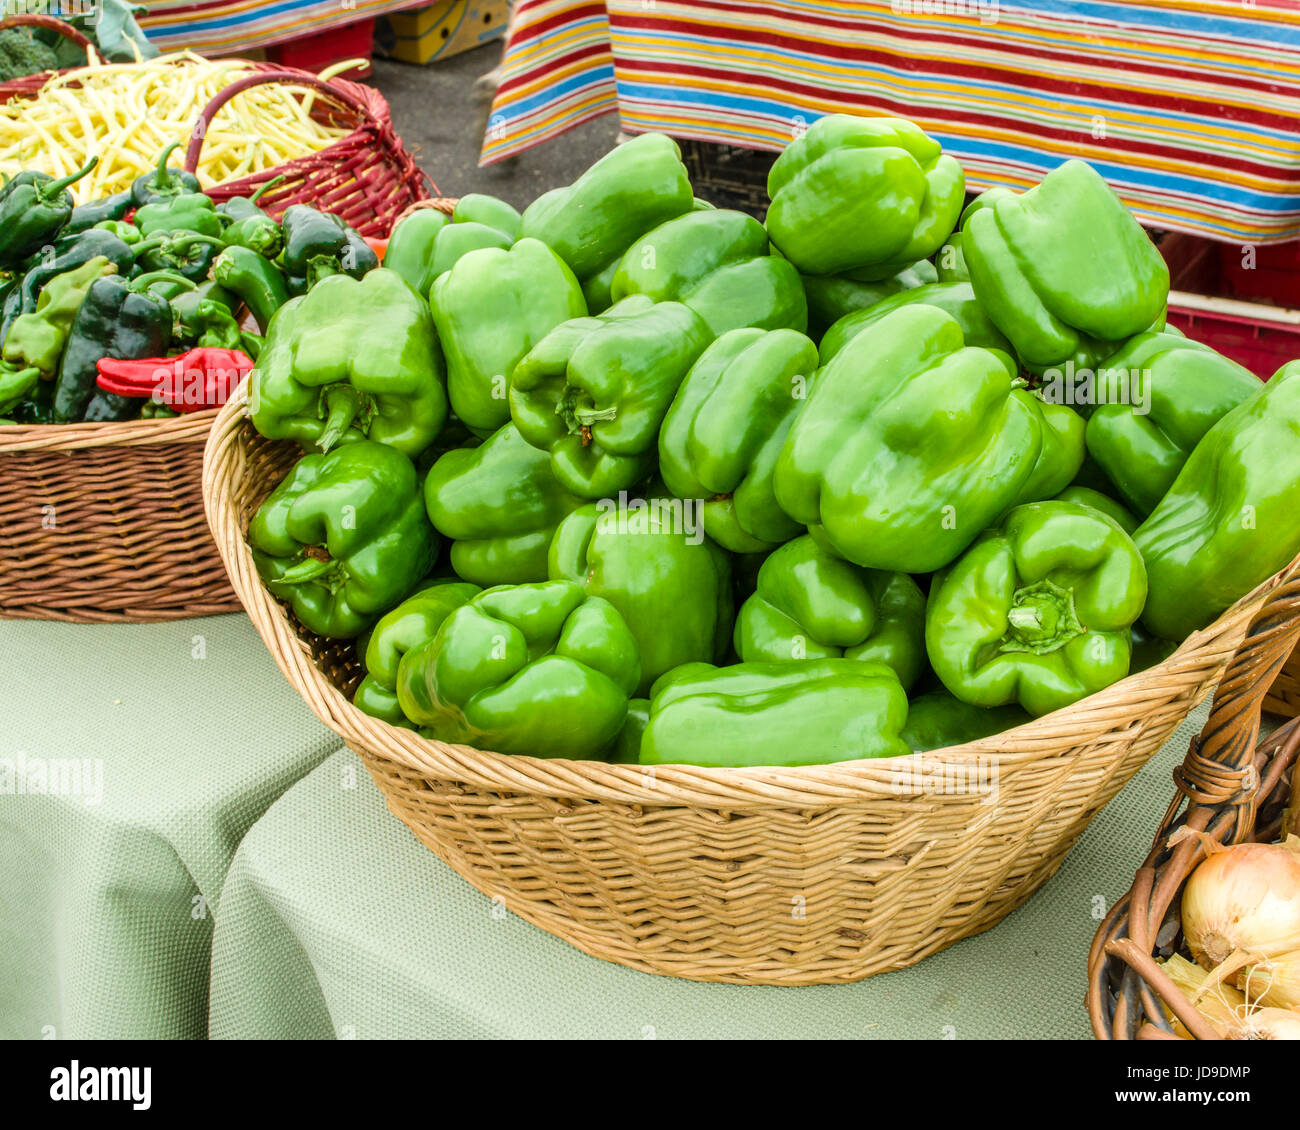 Basket of fresh green peppers at the market Stock Photo